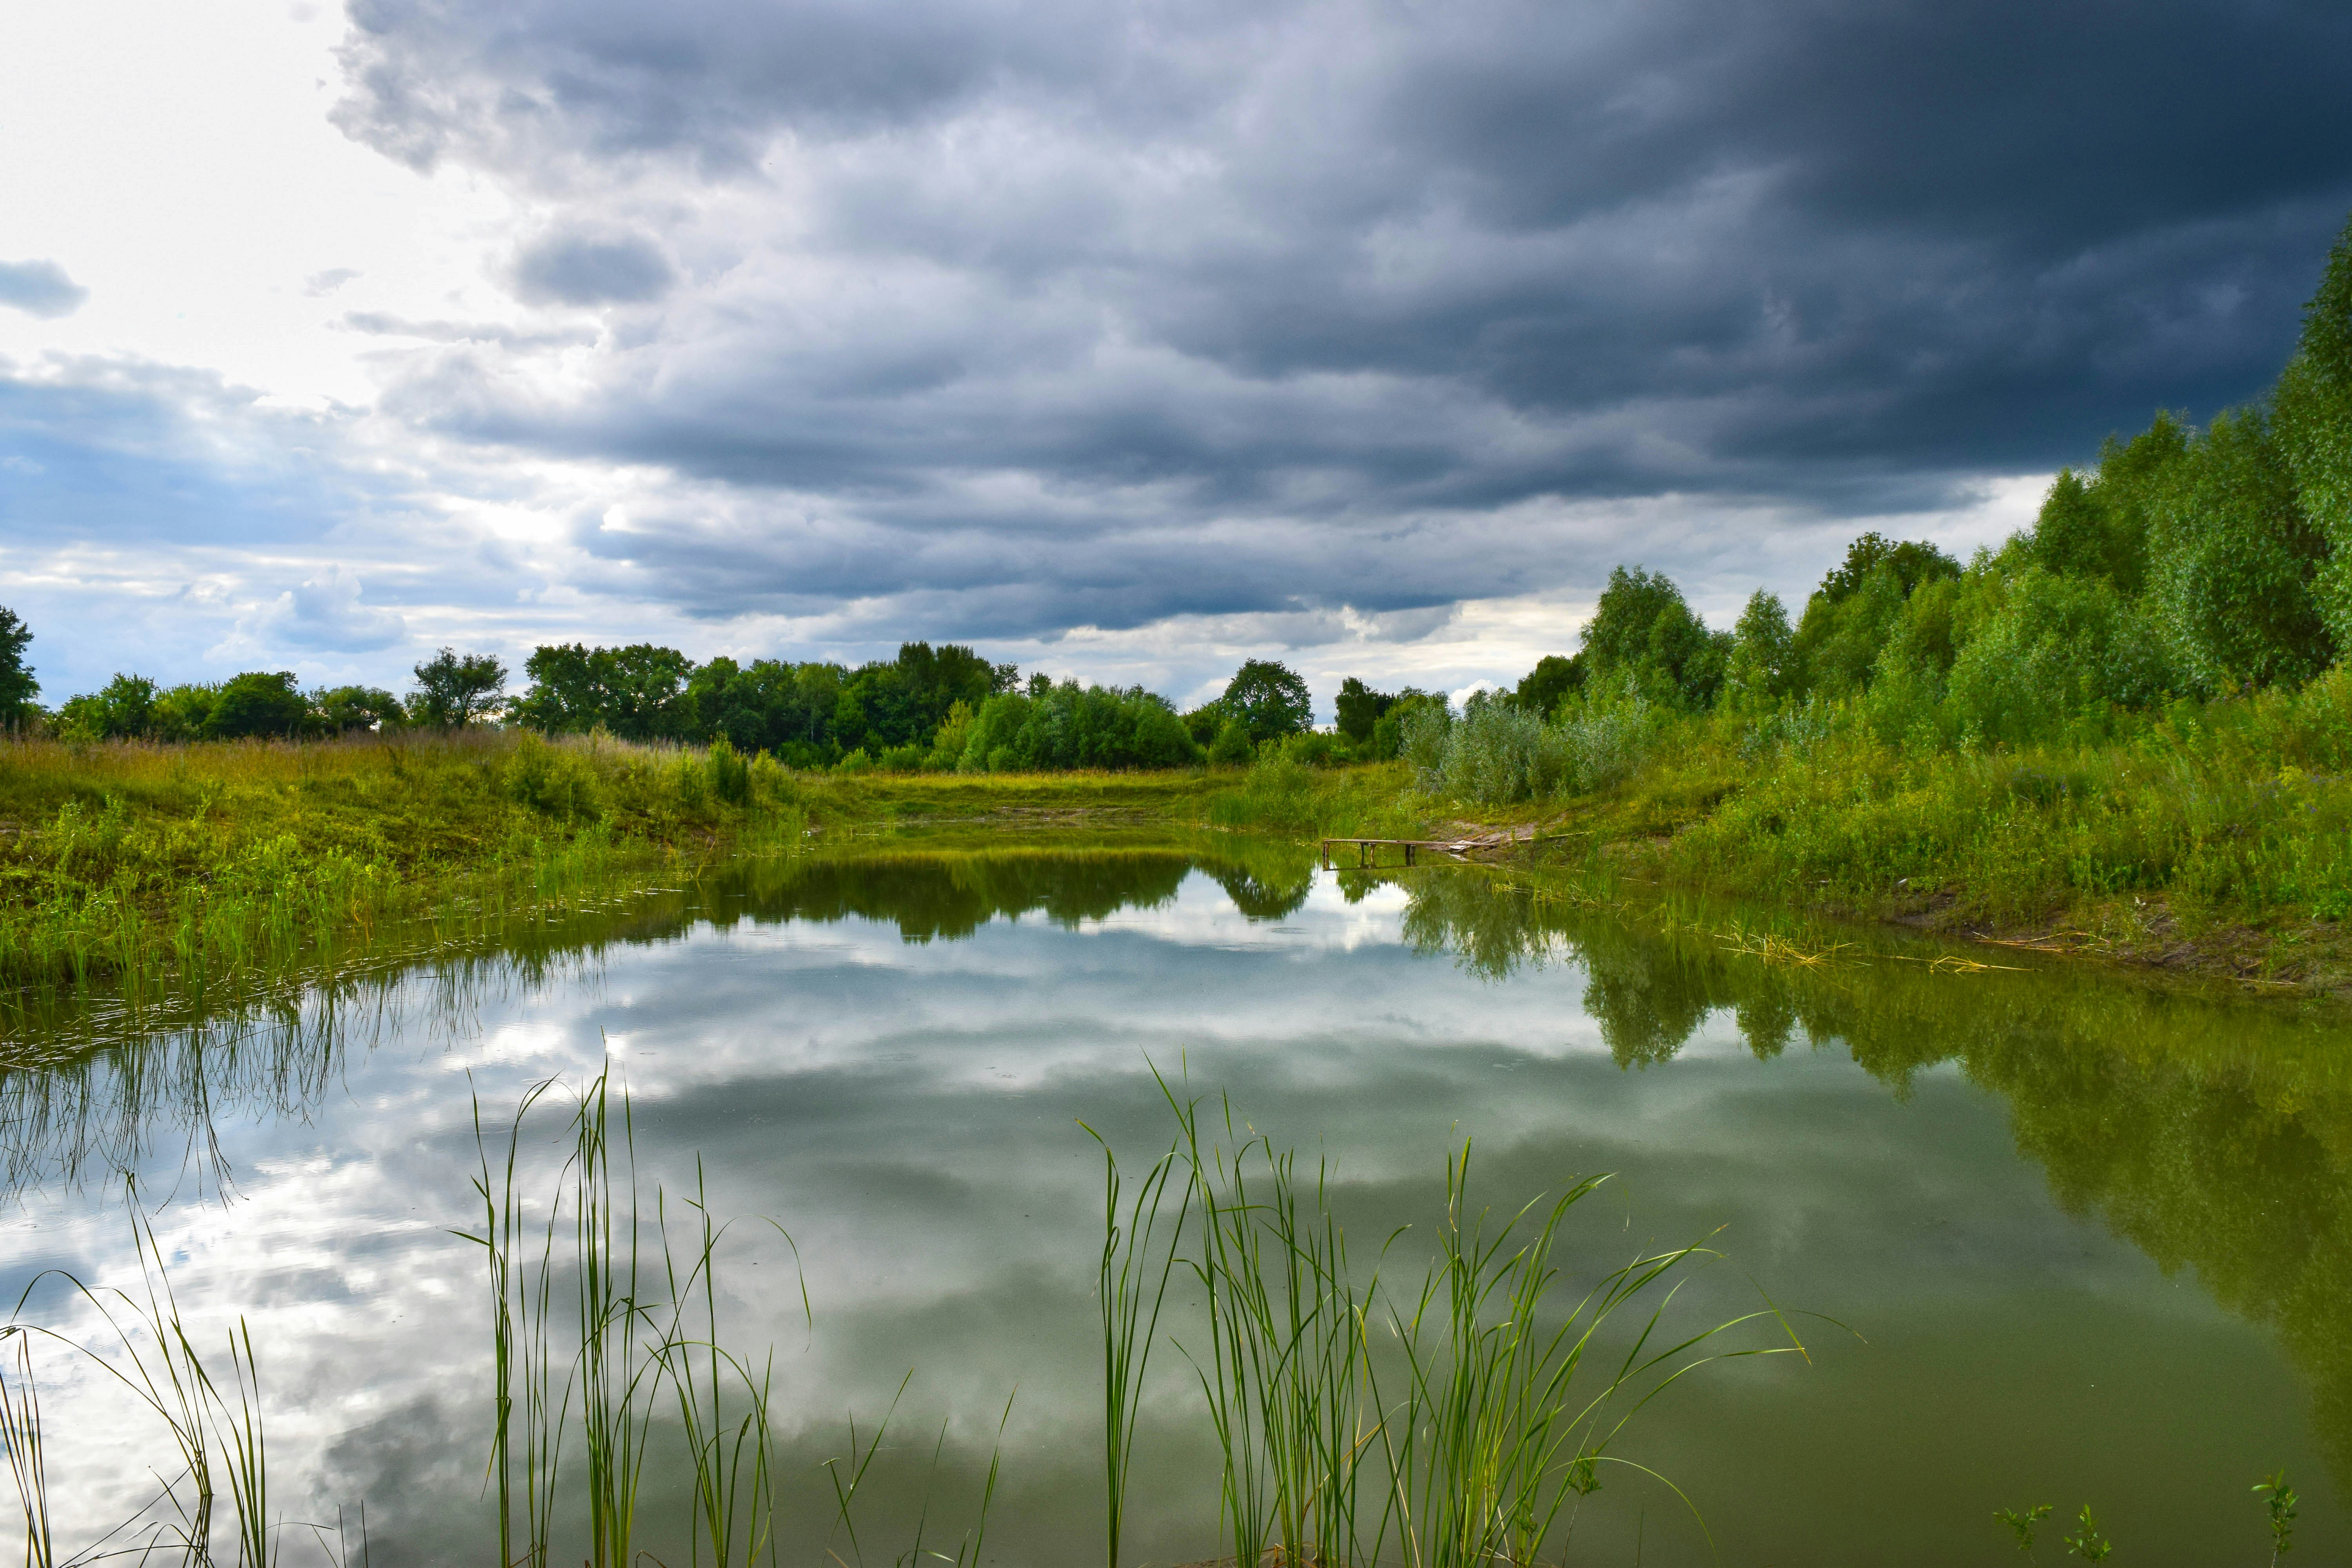 Storm cloud over the pond in the meadow